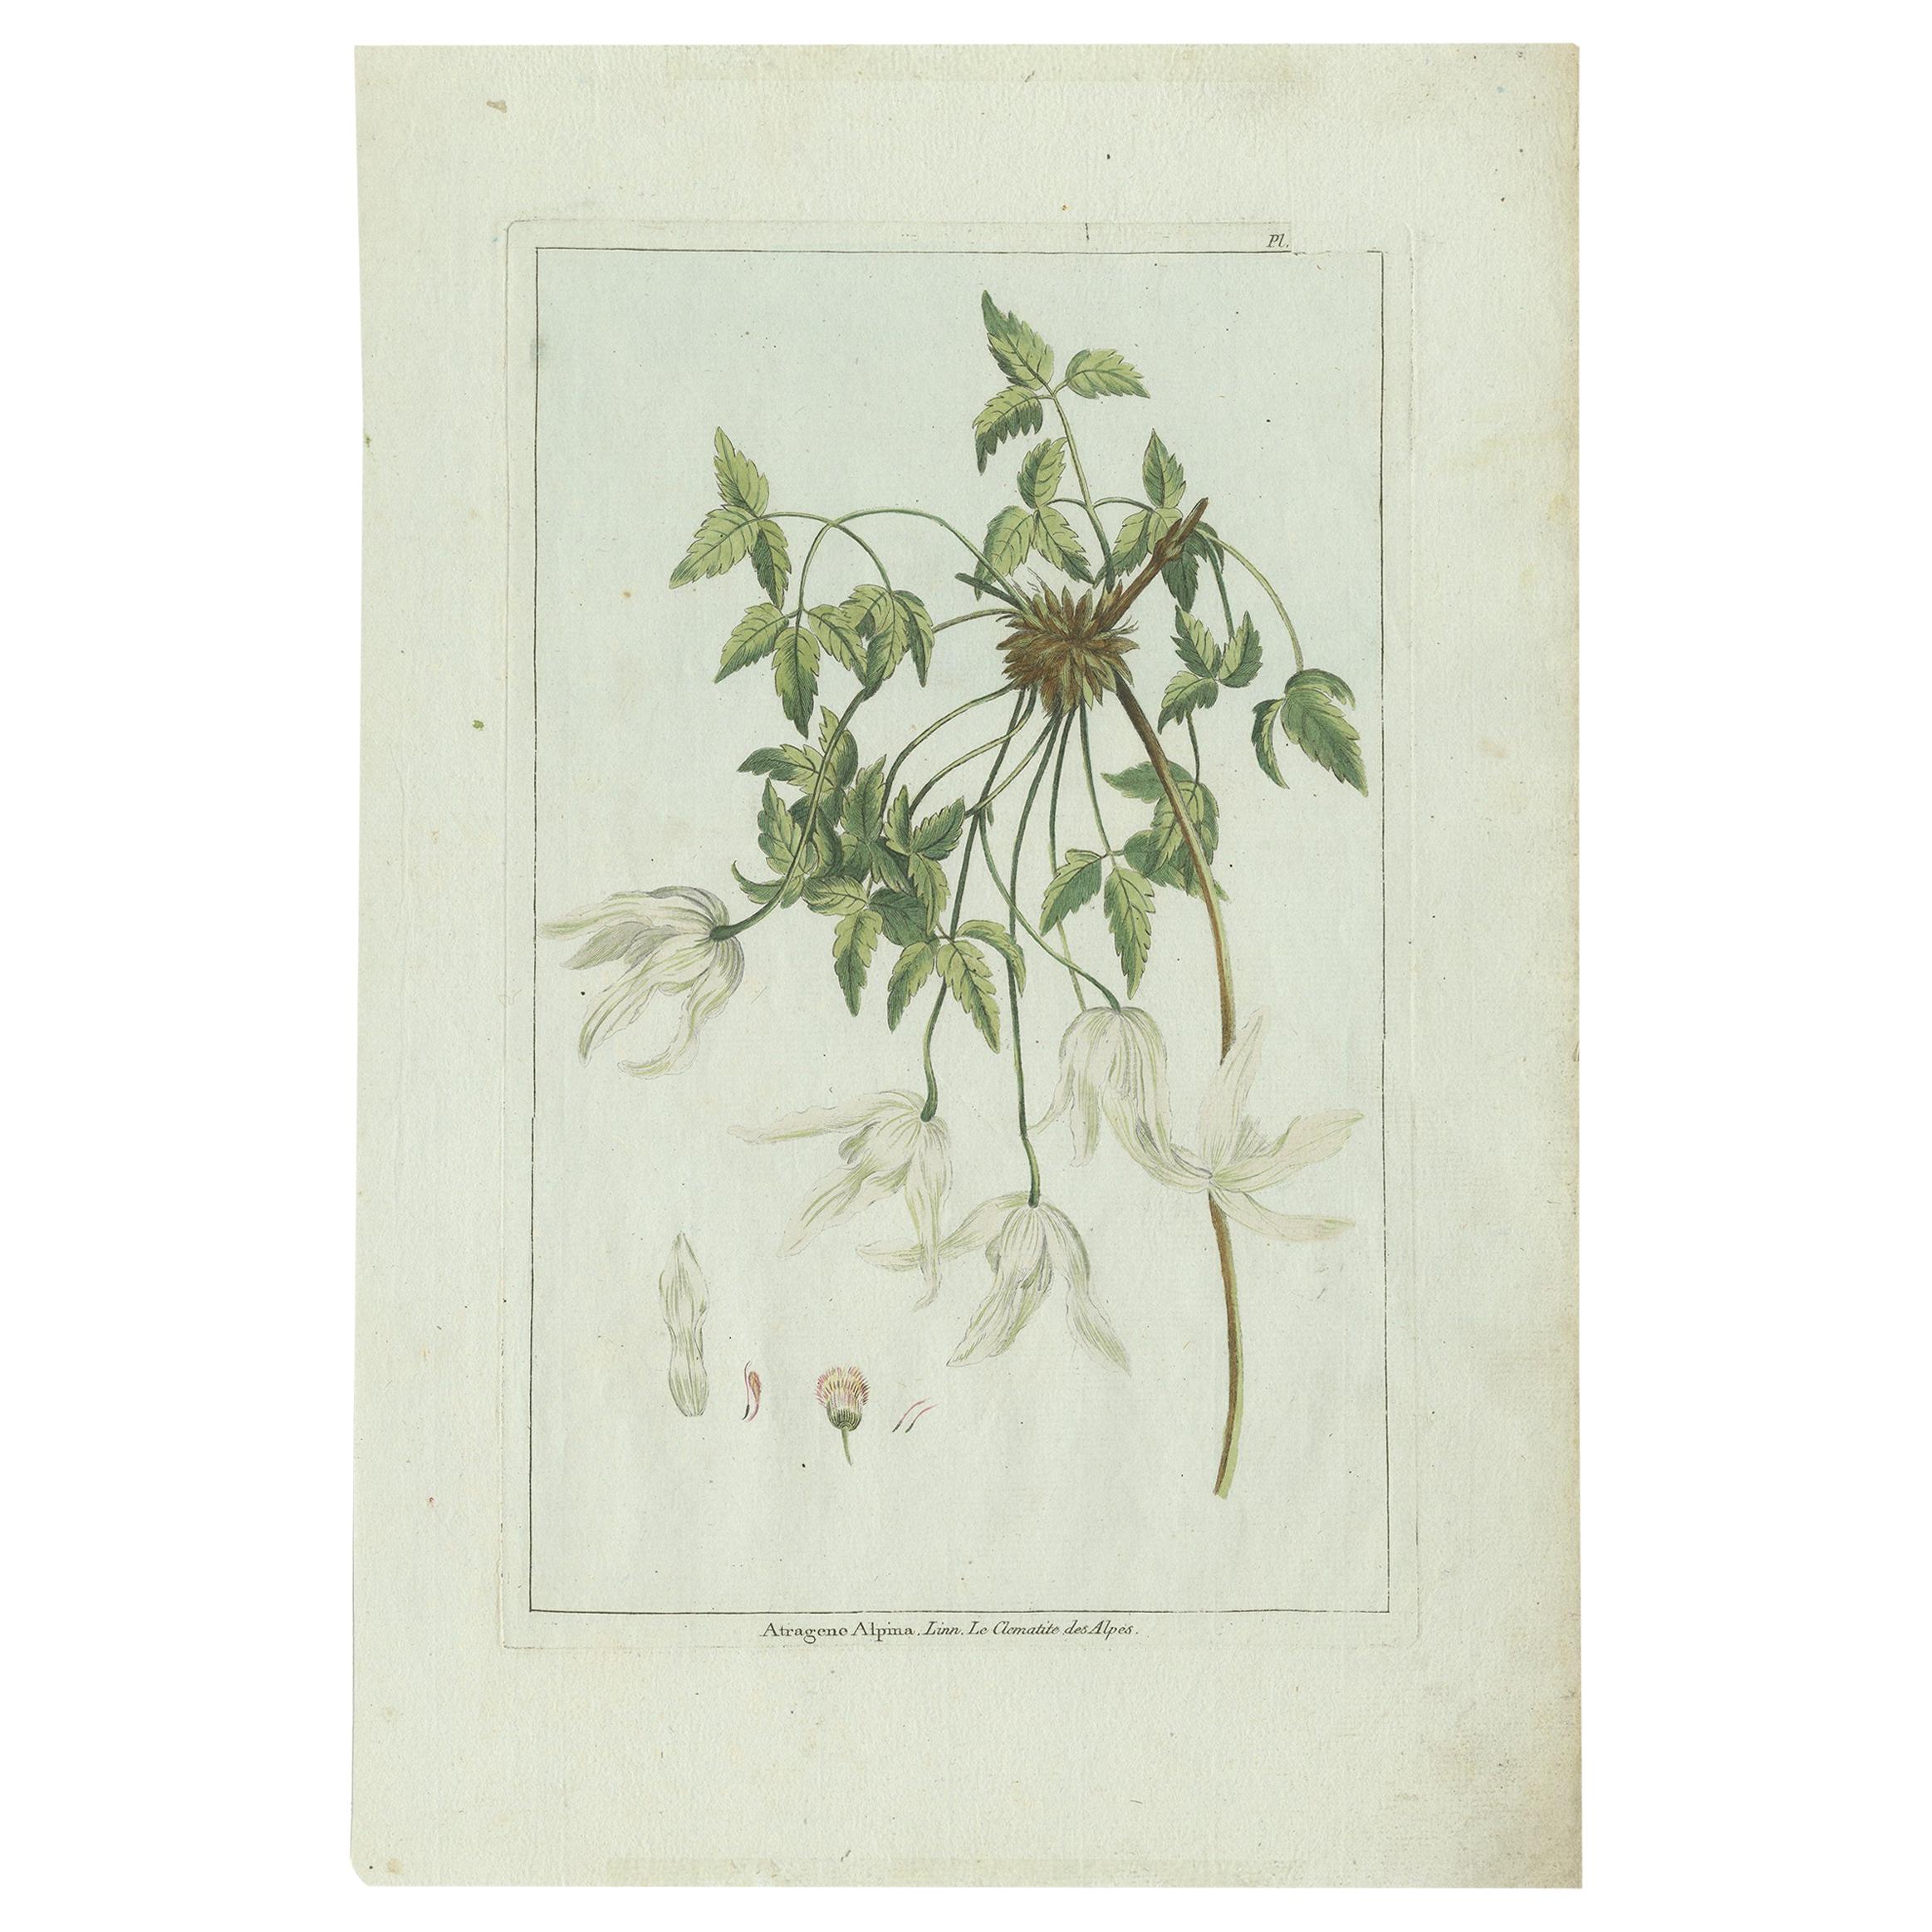 Antique Botany Print of a Clematis Species by Buchoz, circa 1785